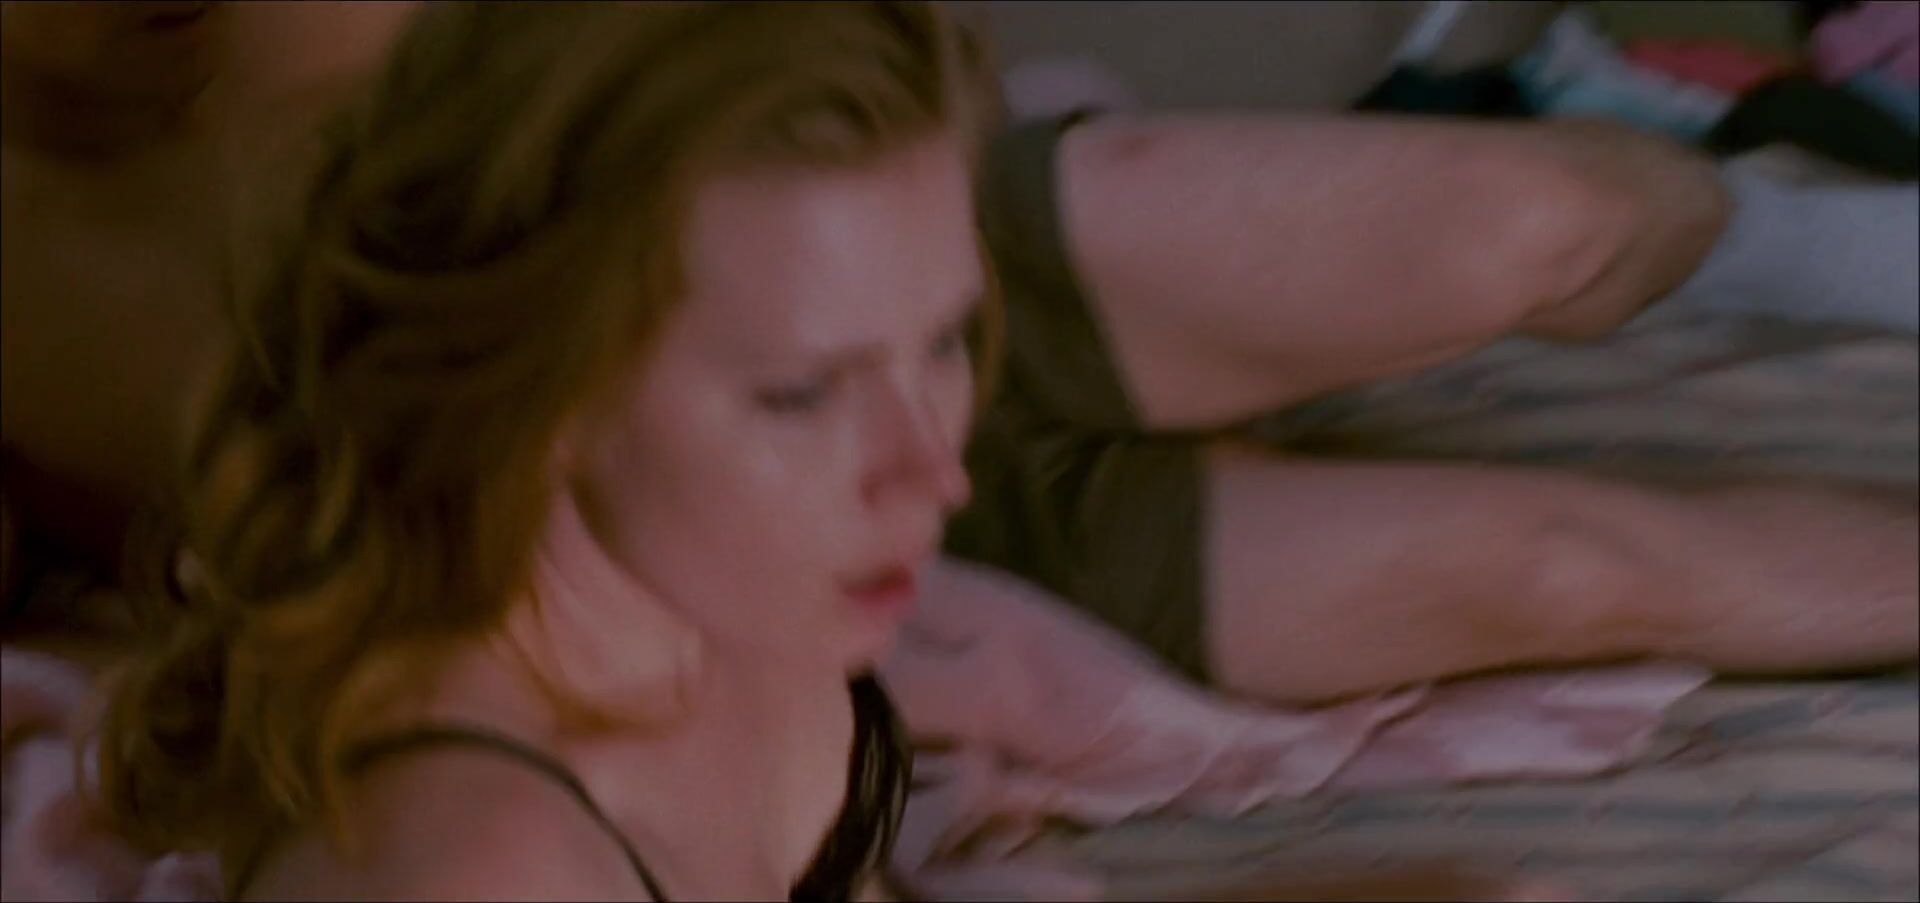 Jilling Man takes Amy Adams to bed but fails to bonk her in nude scene from The Fighter (2010) Anal - 1